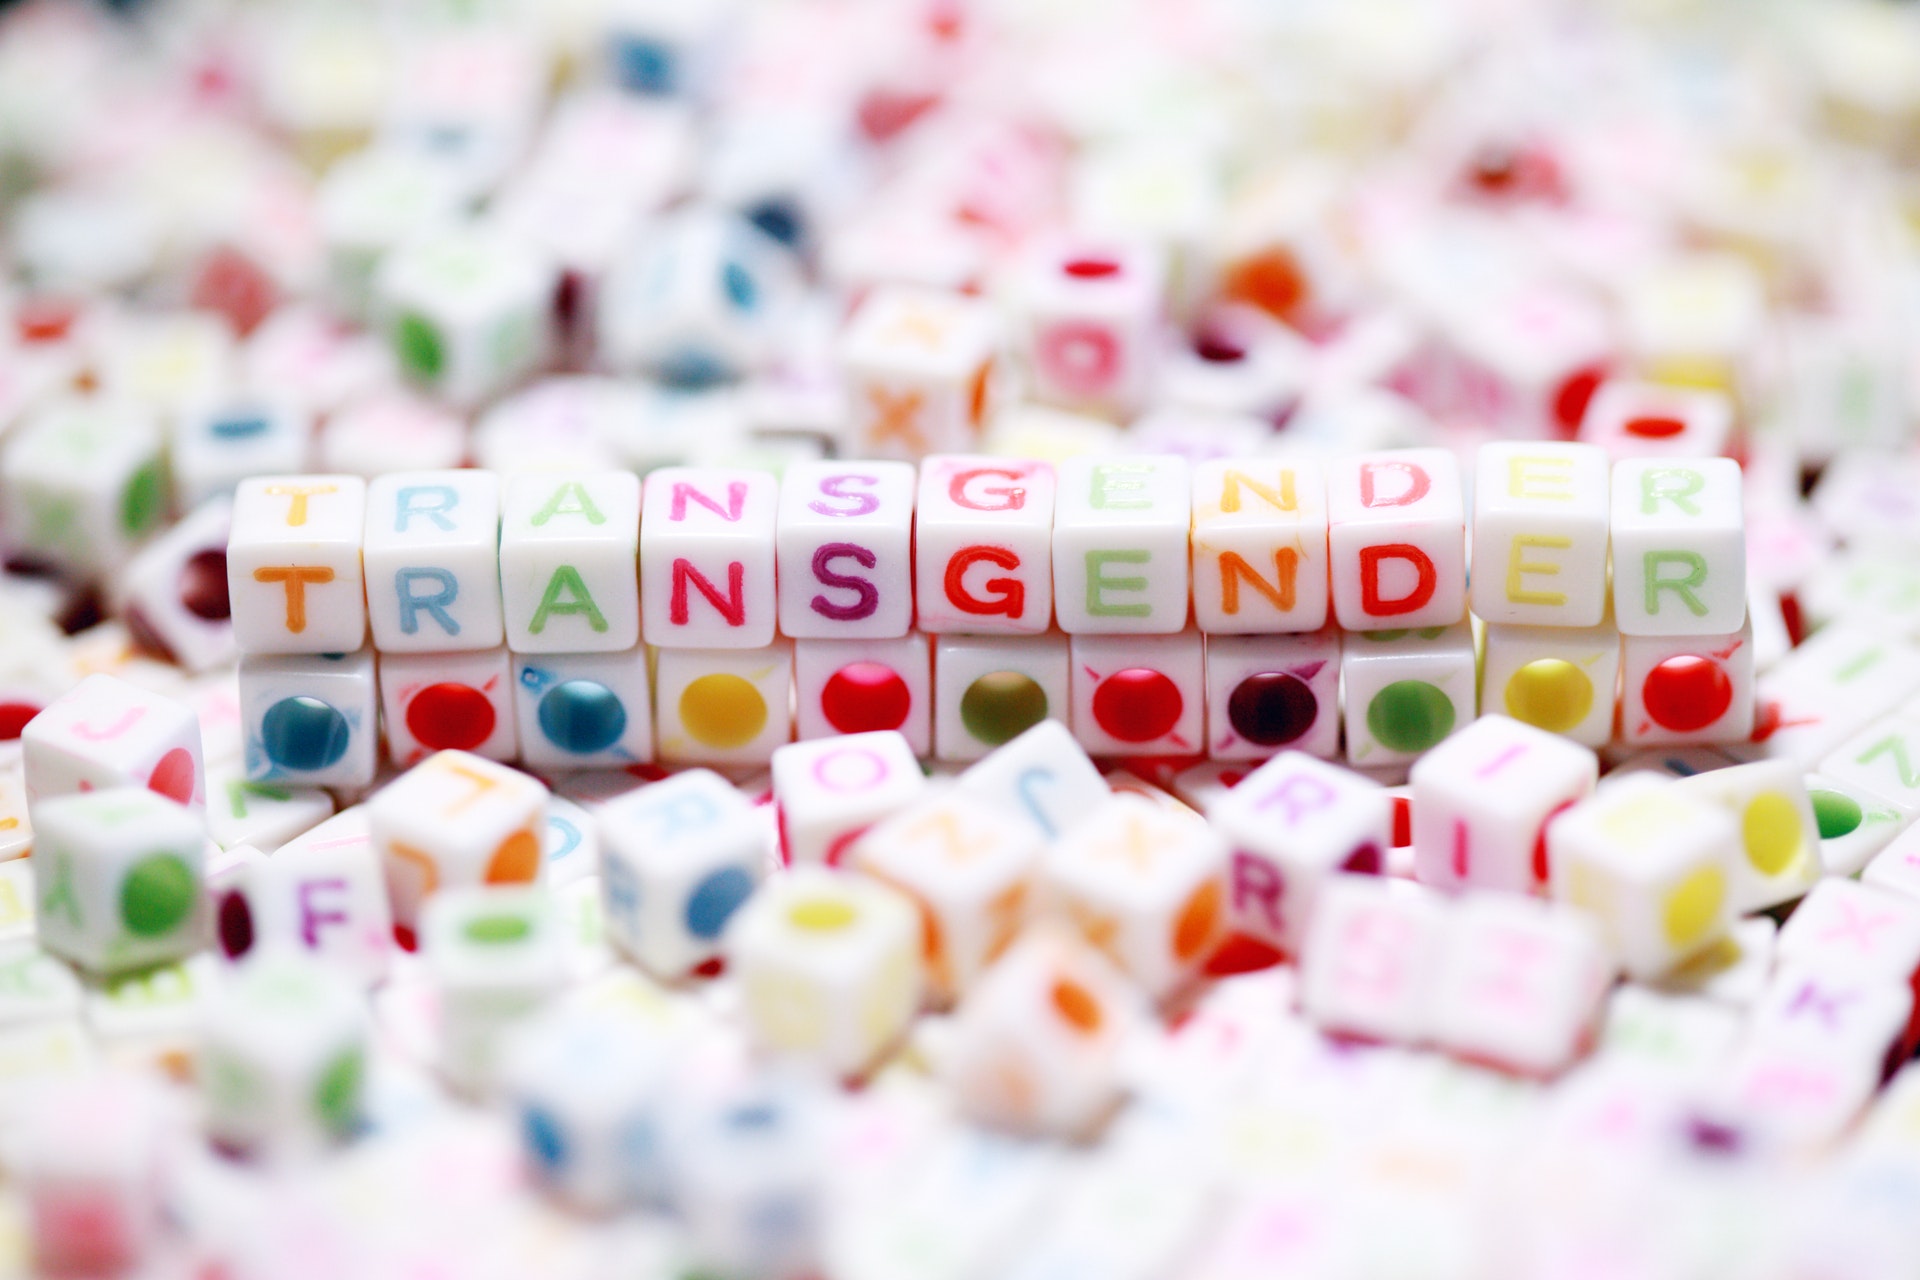 What does transgender actually mean? And how do I know if I am trans?